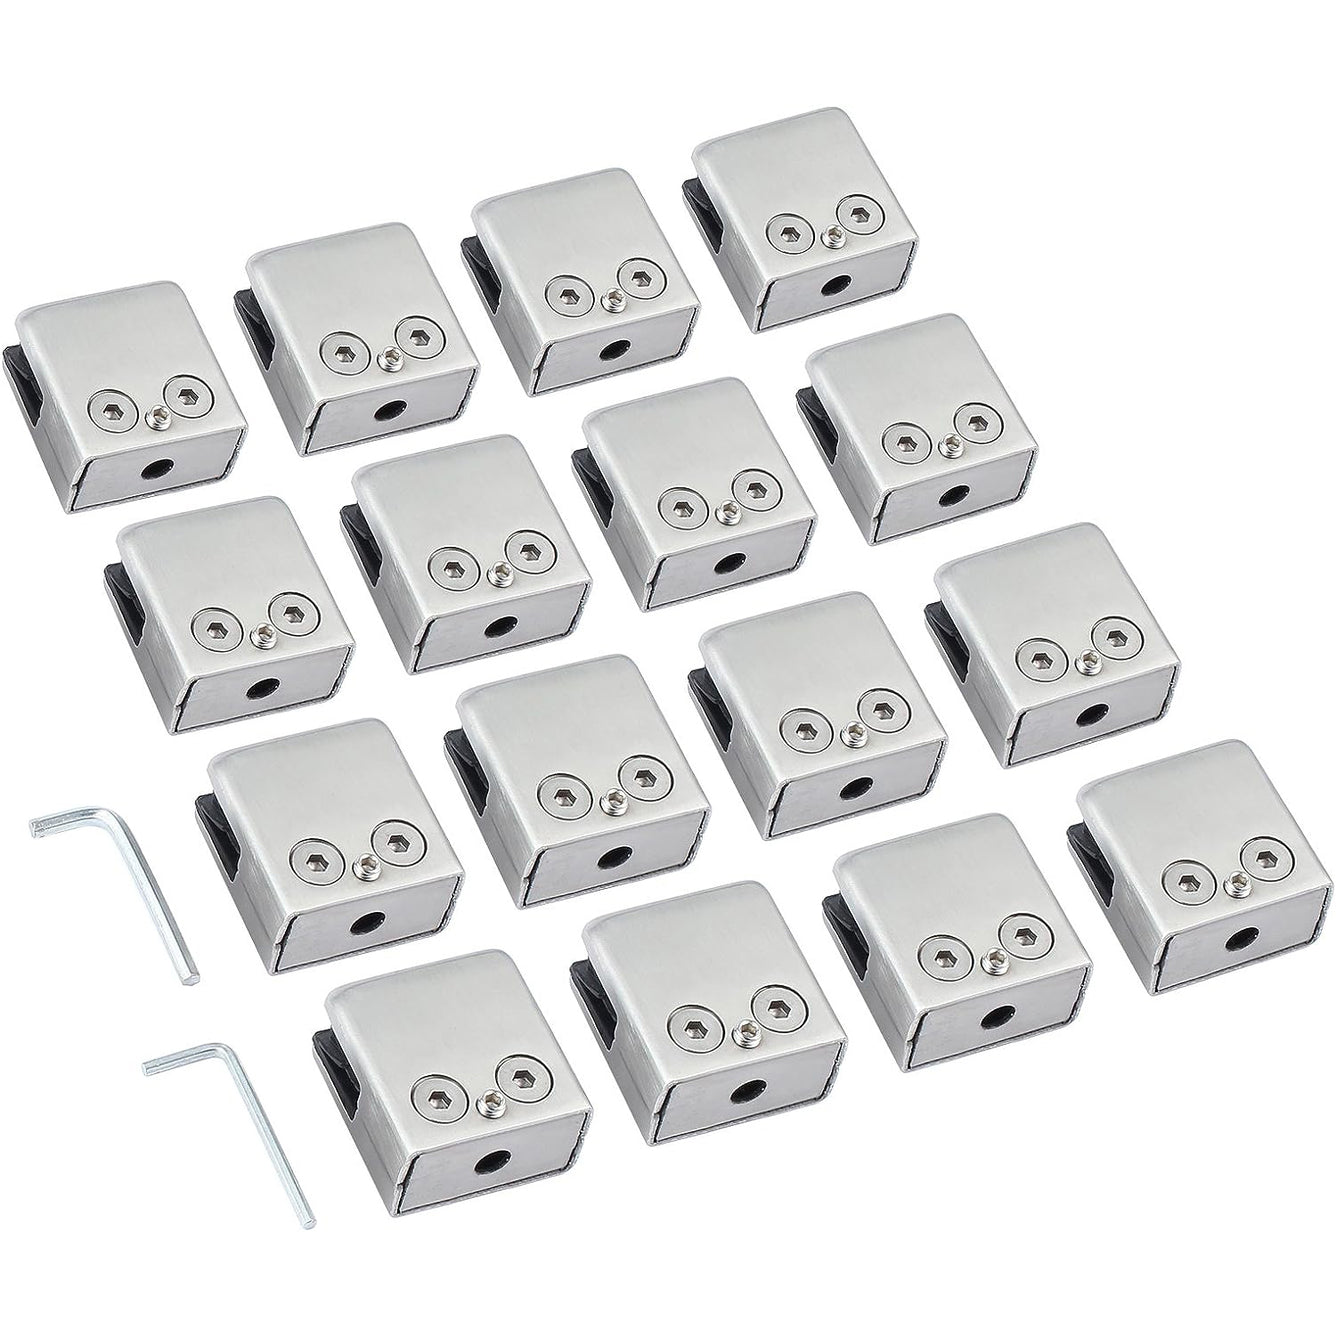 16 PCS 9-10mm Glass Mounting Brackets, Square Glass Clamps